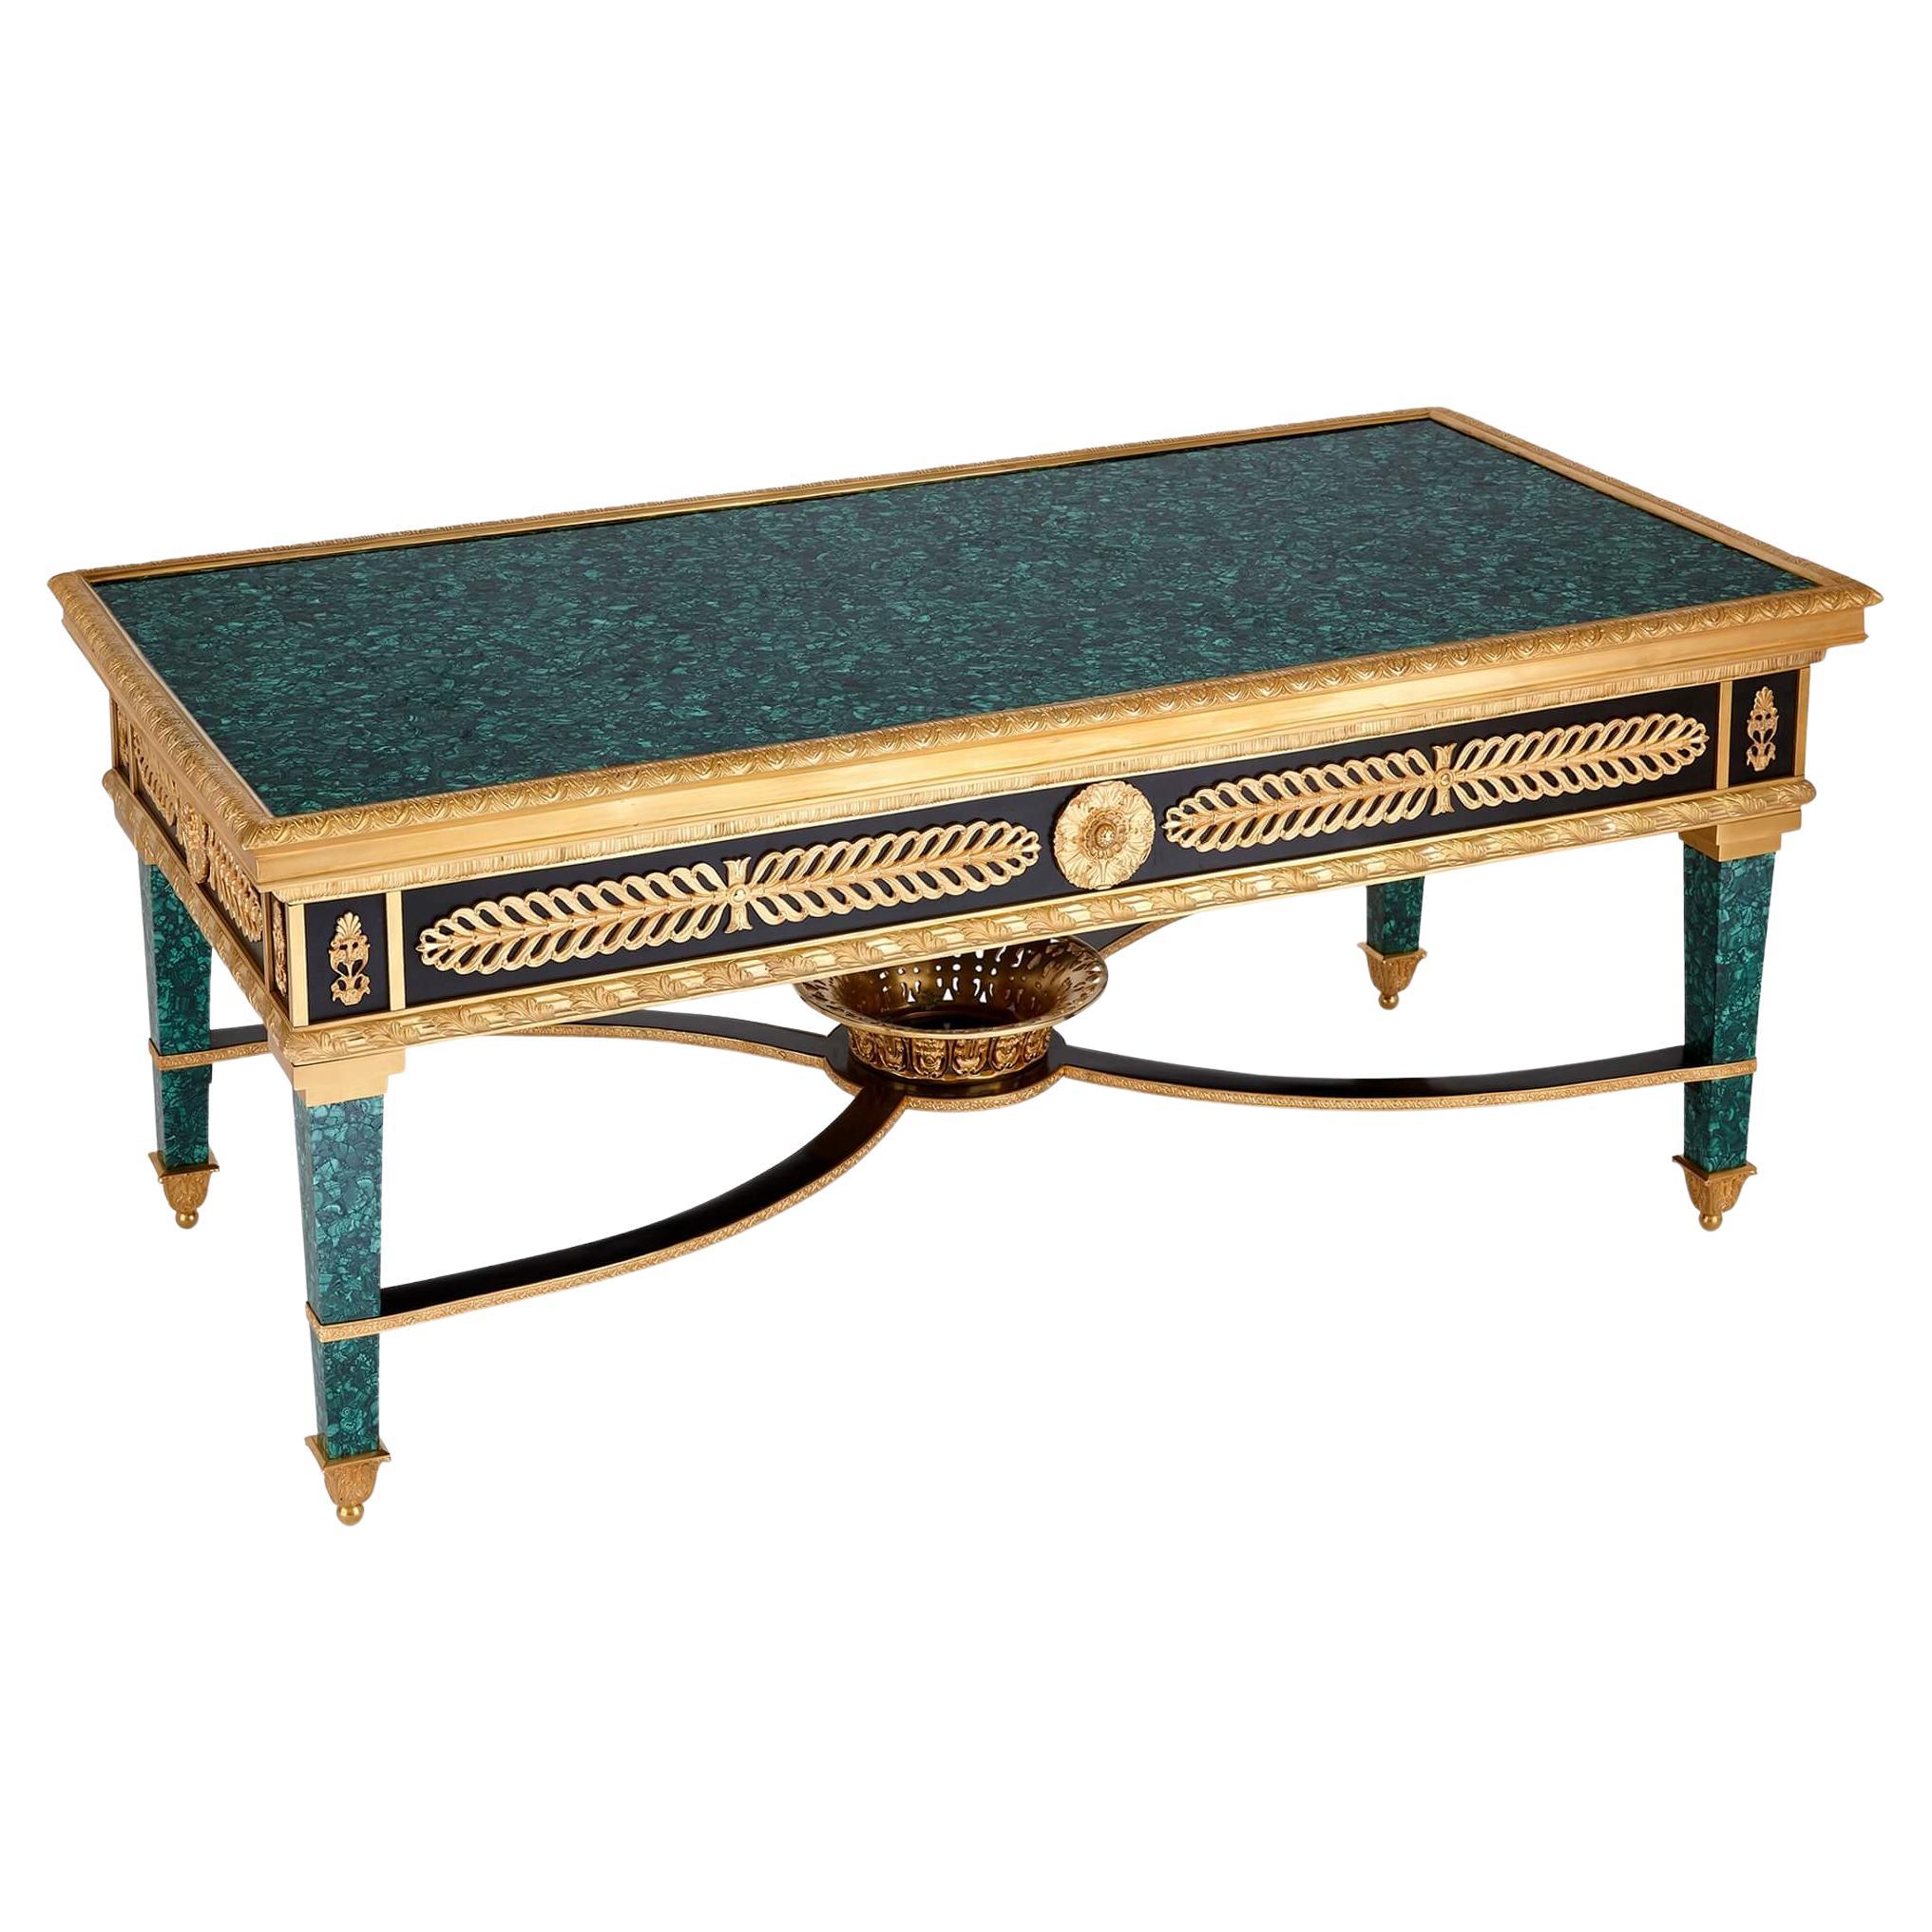 French Empire-style gilt bronze mounted malachite coffee table For Sale